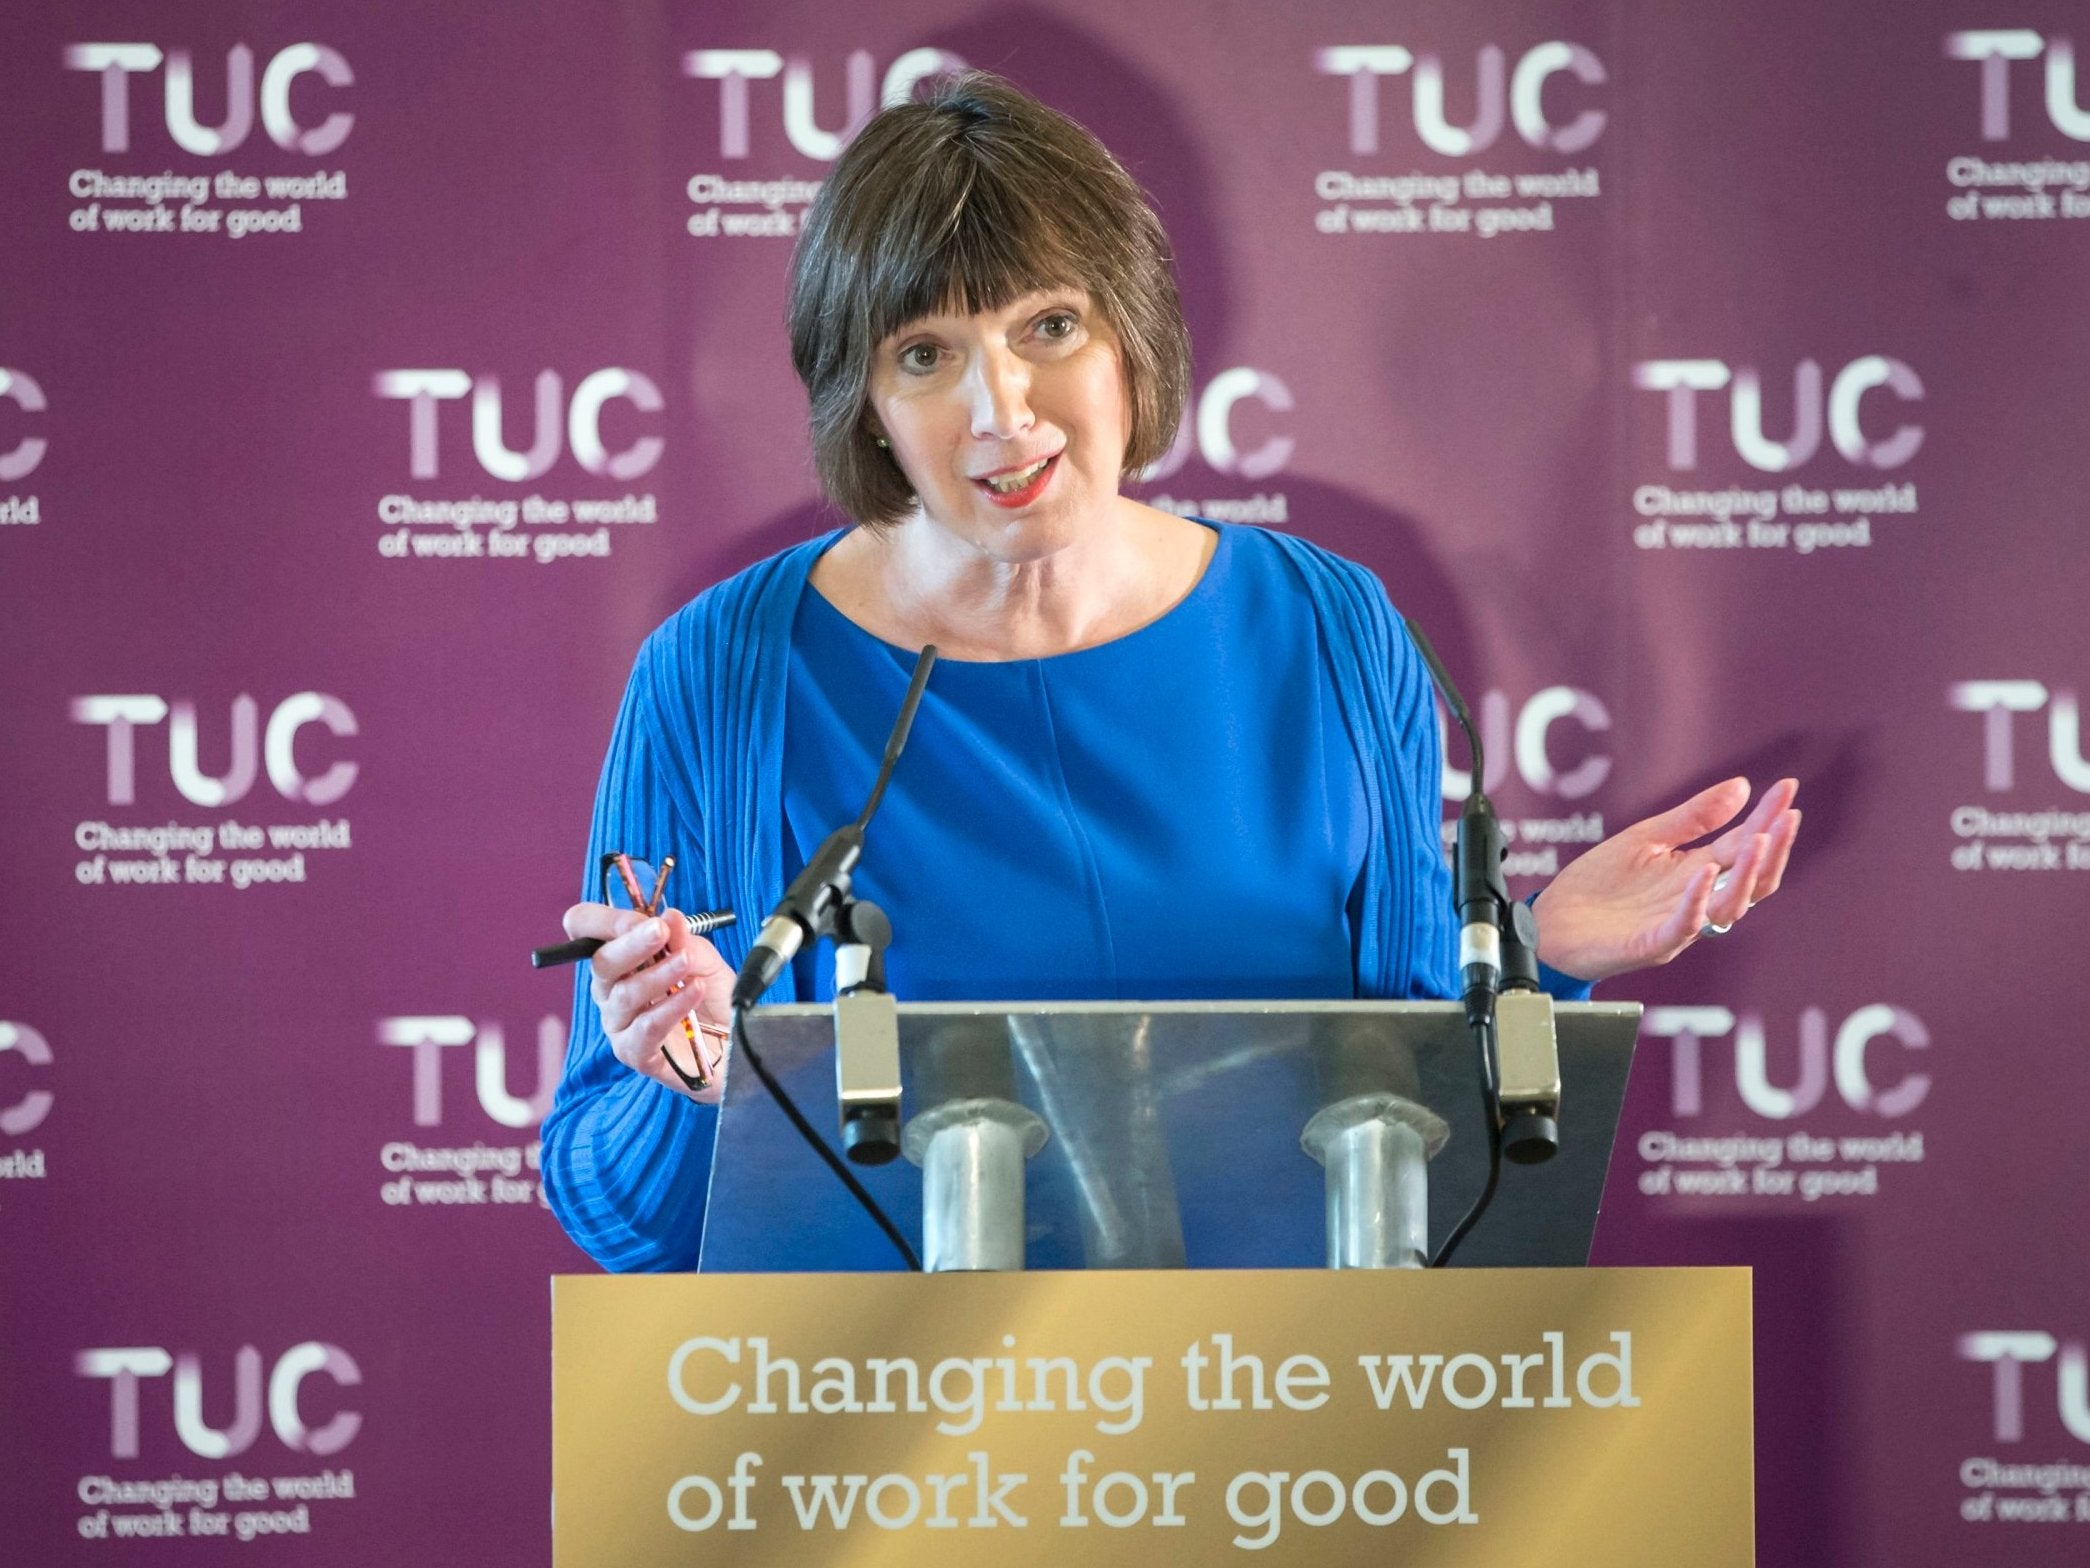 Frances O’Grady of the TUC has called for a move to a four-day working week